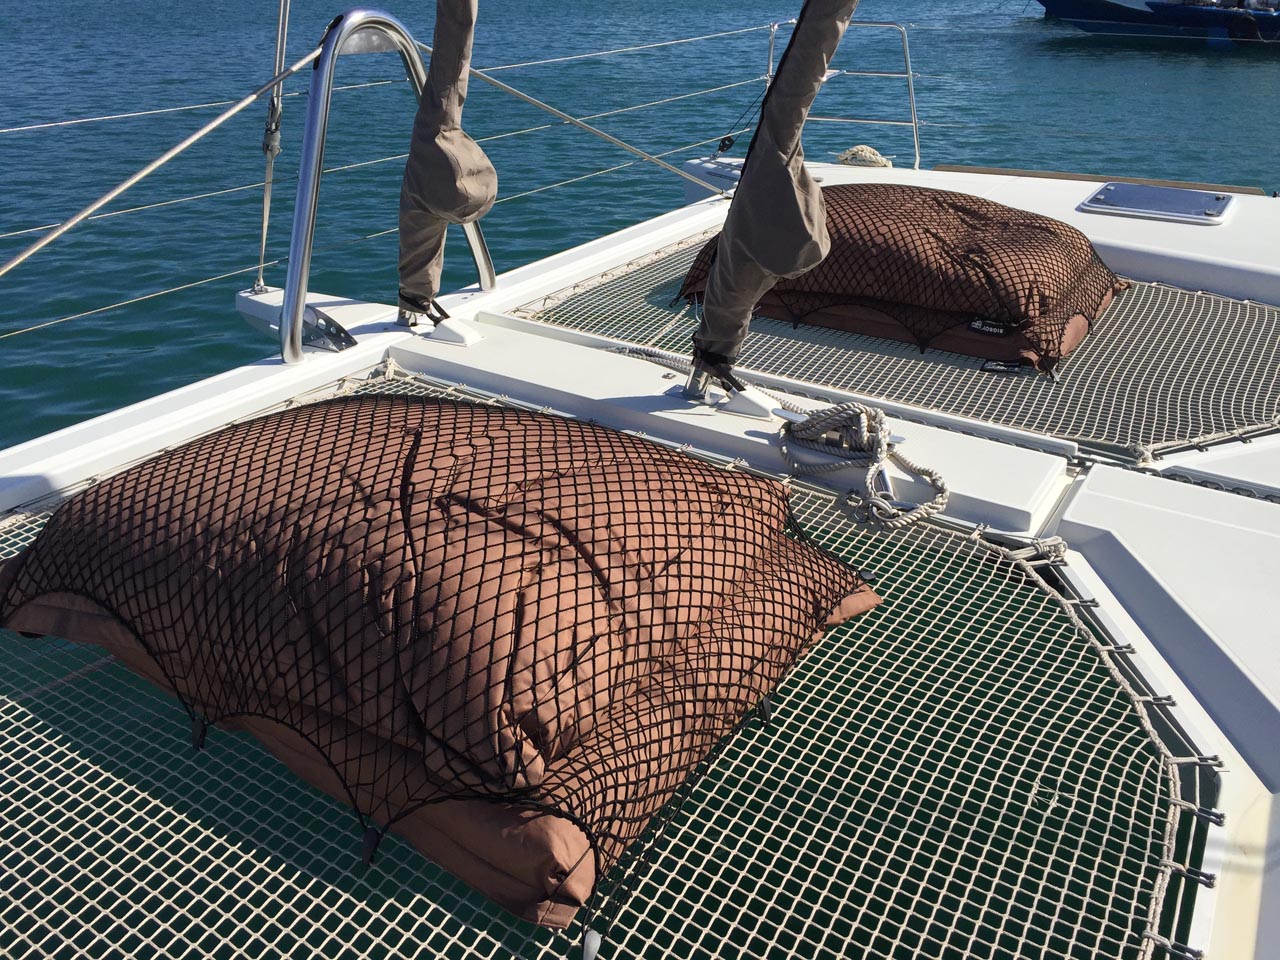 Bespoke elasticated nets for covering cushions on a boat deck.